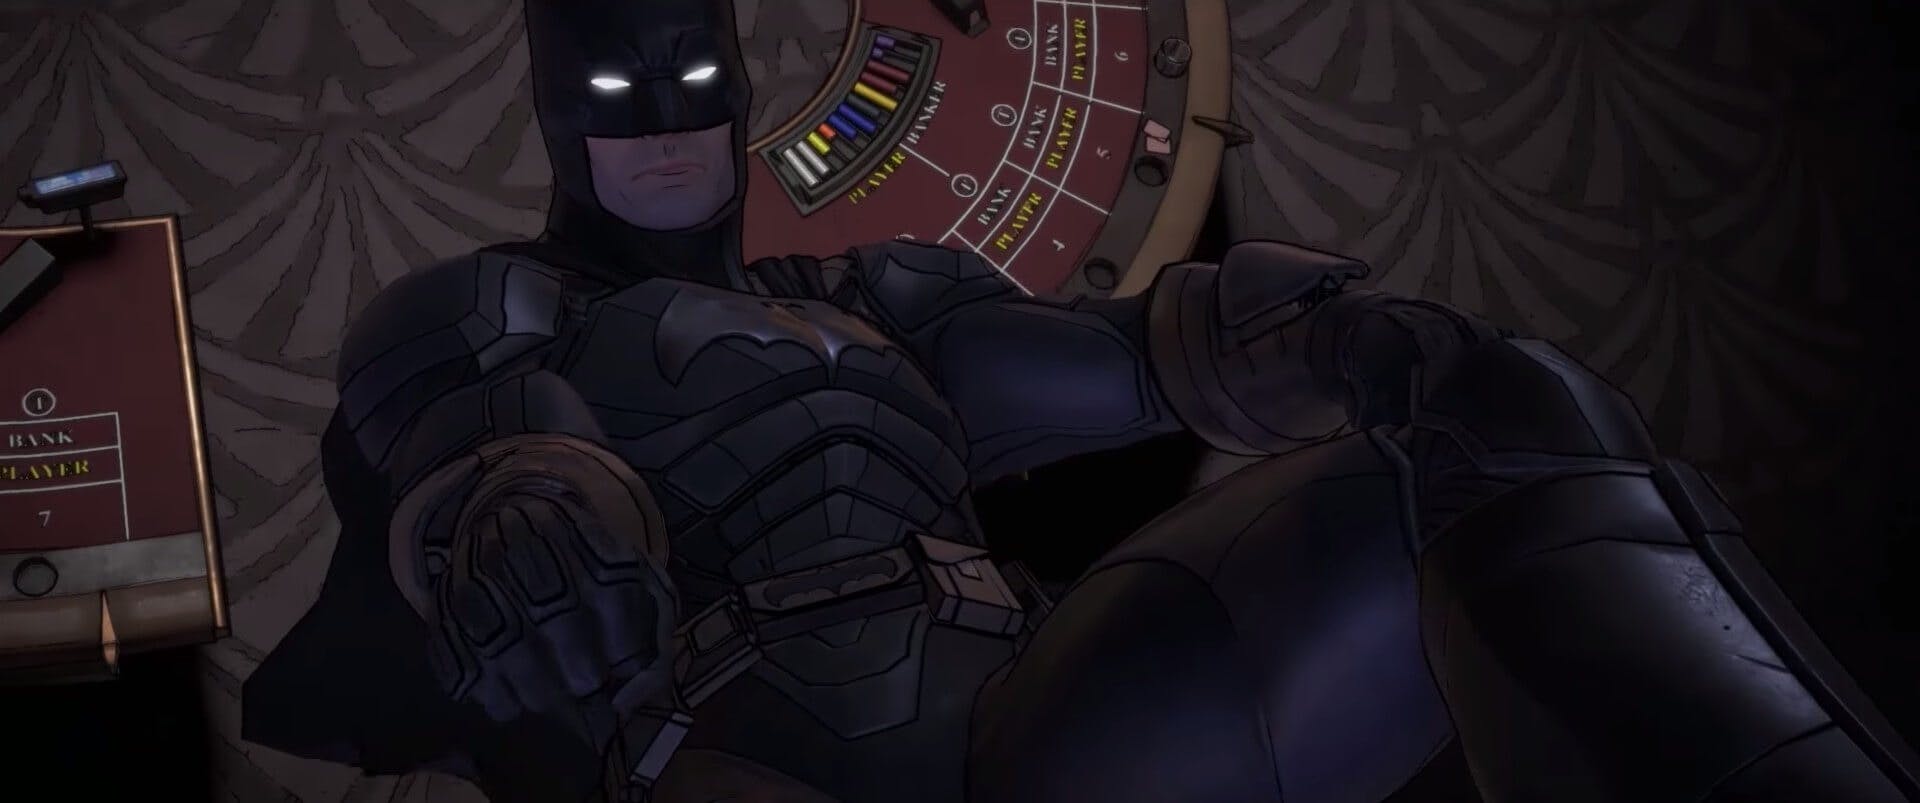 Batman: the enemy within